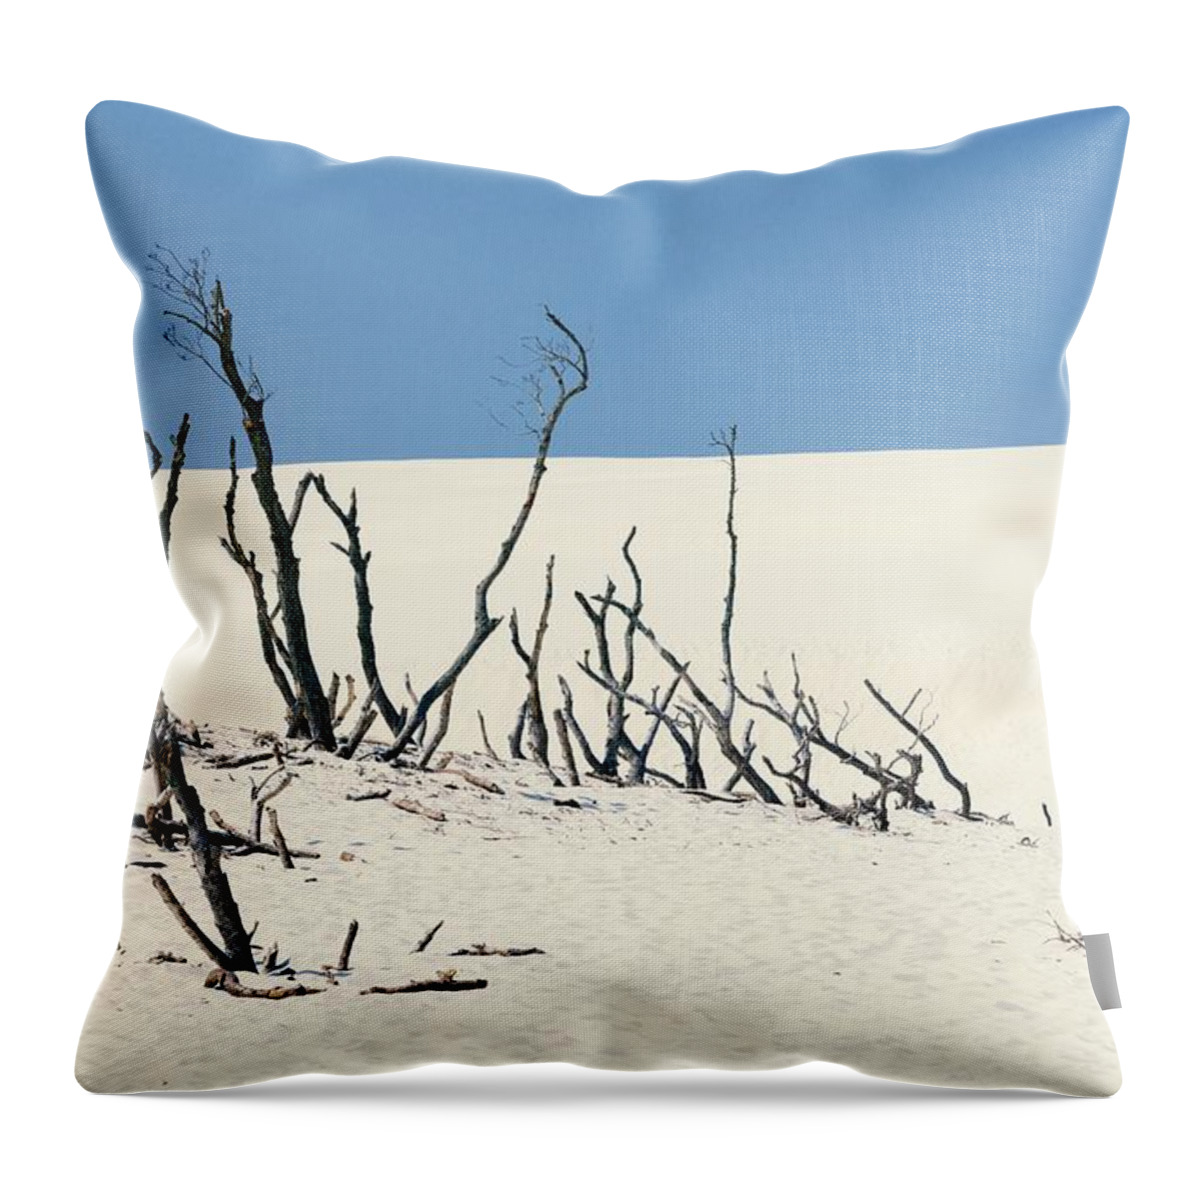 Sand Throw Pillow featuring the photograph Sand Dune With Dead Trees by Chevy Fleet